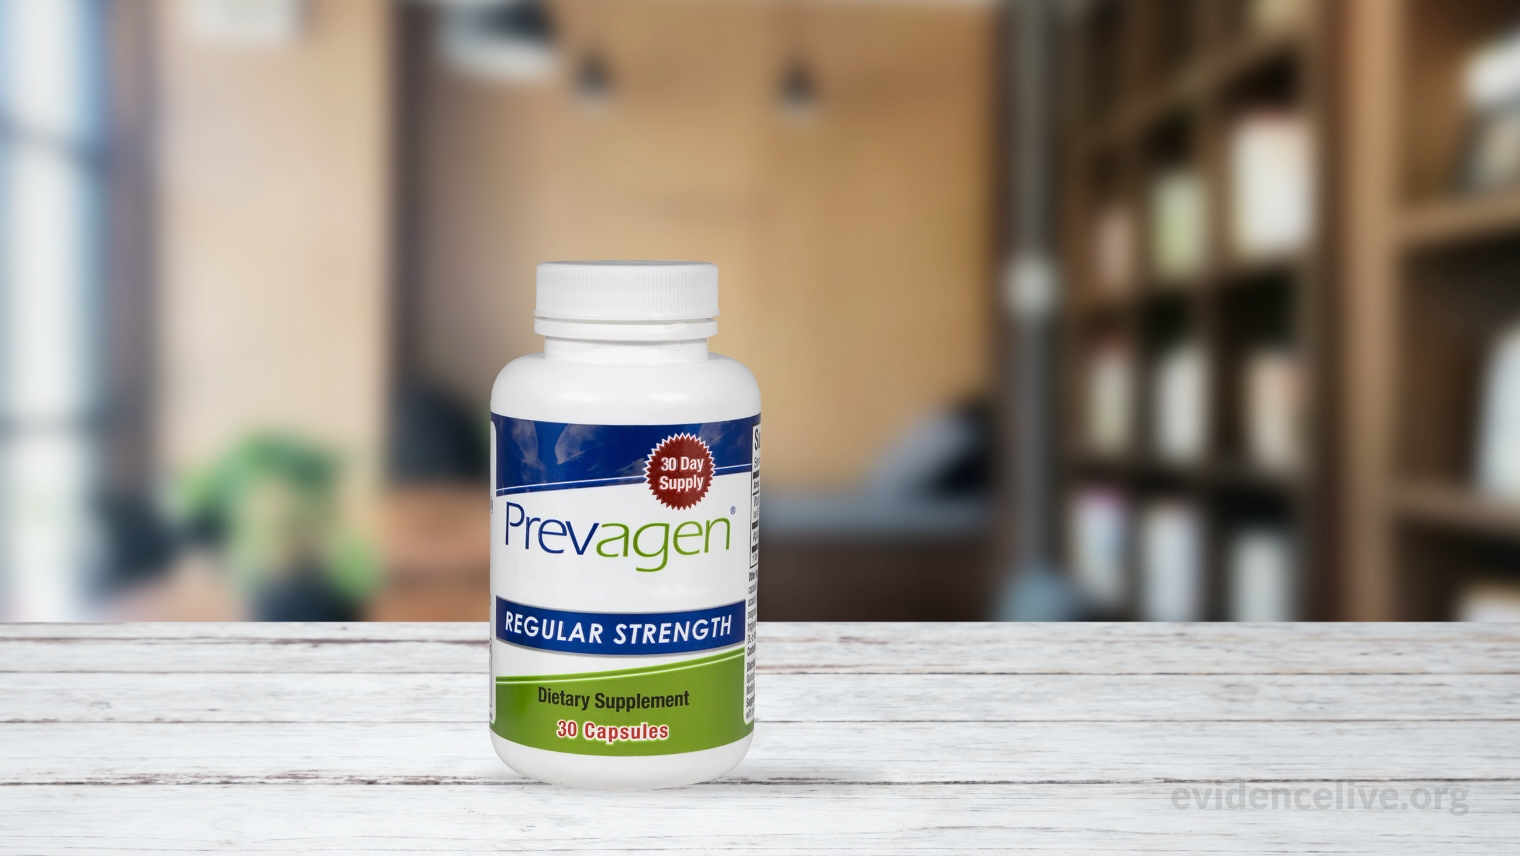 Prevagen benefits and effects